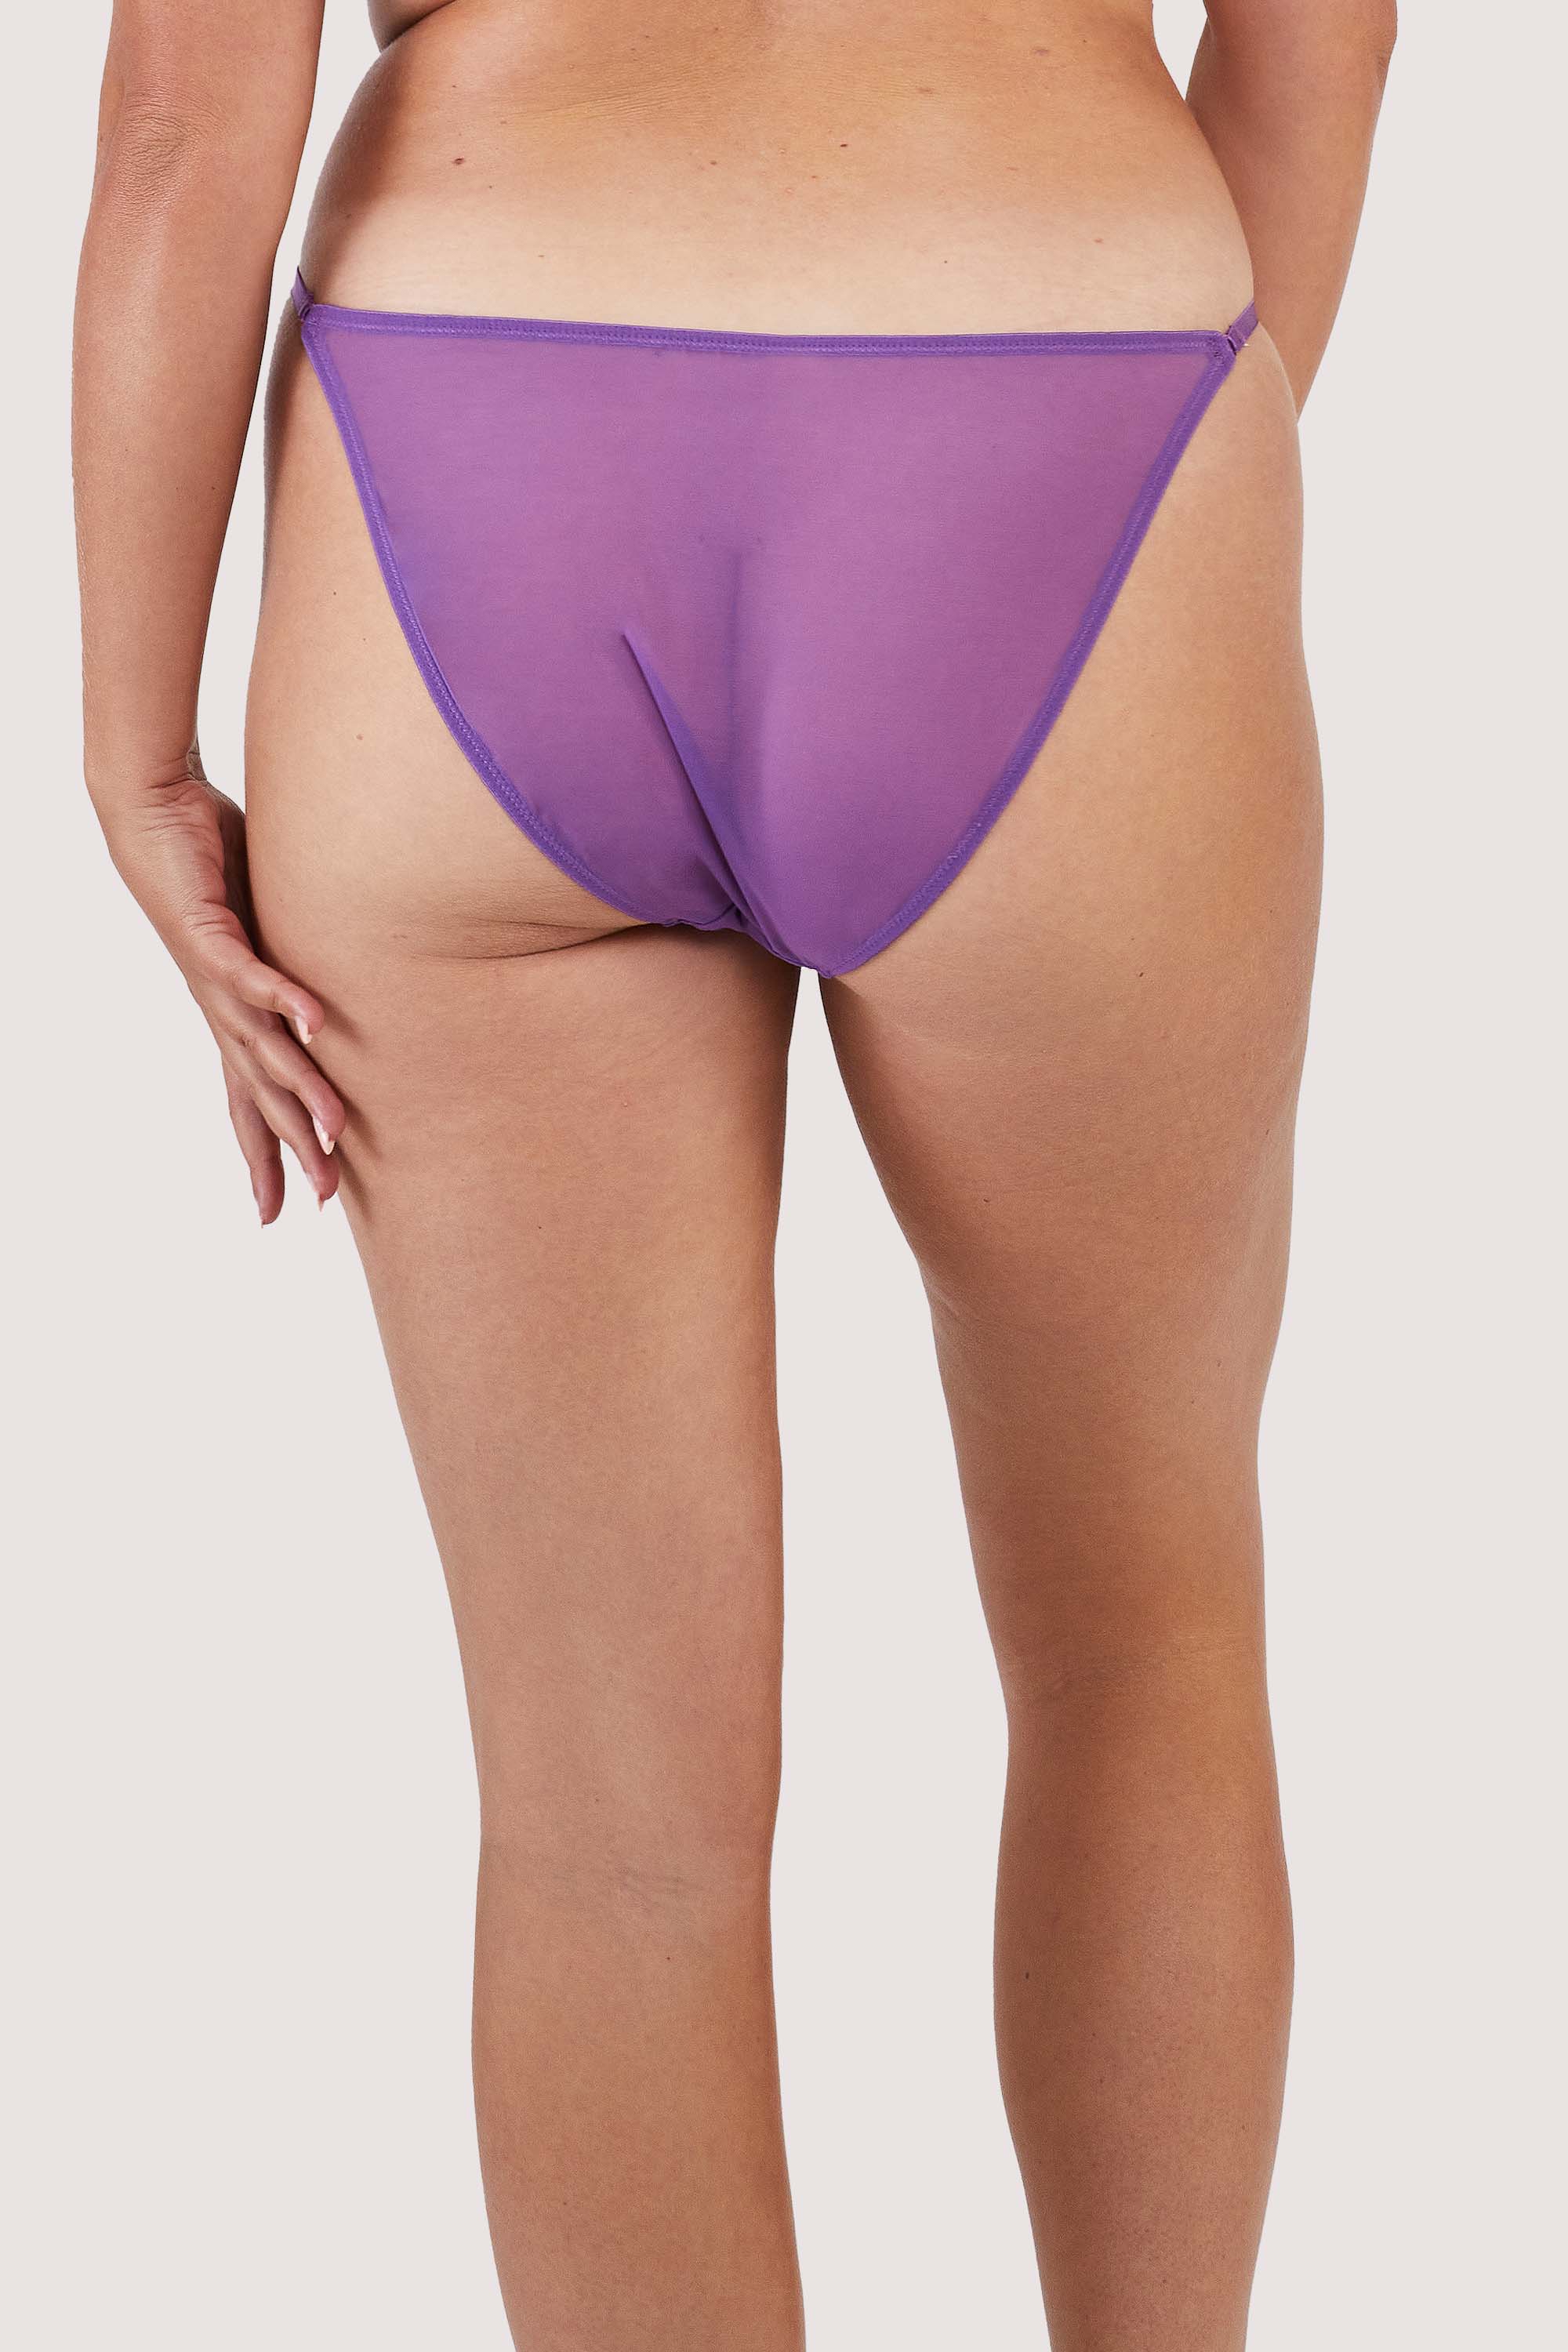 Back view of a purple mesh tanga brief with pink and purple floral embroidery.